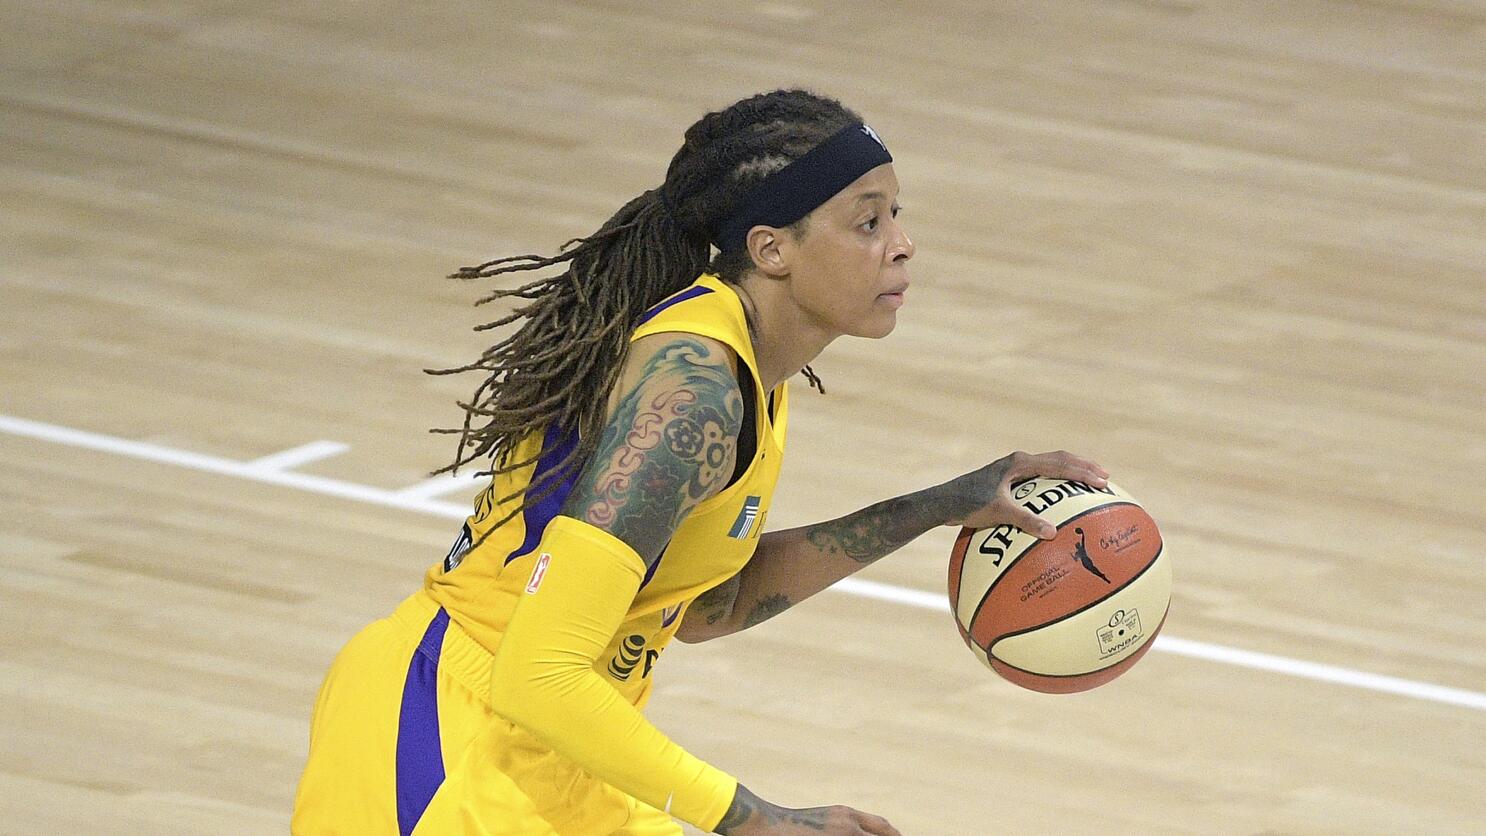 Sparks' Seimone Augustus retires, Sydney Wiese is traded - Los